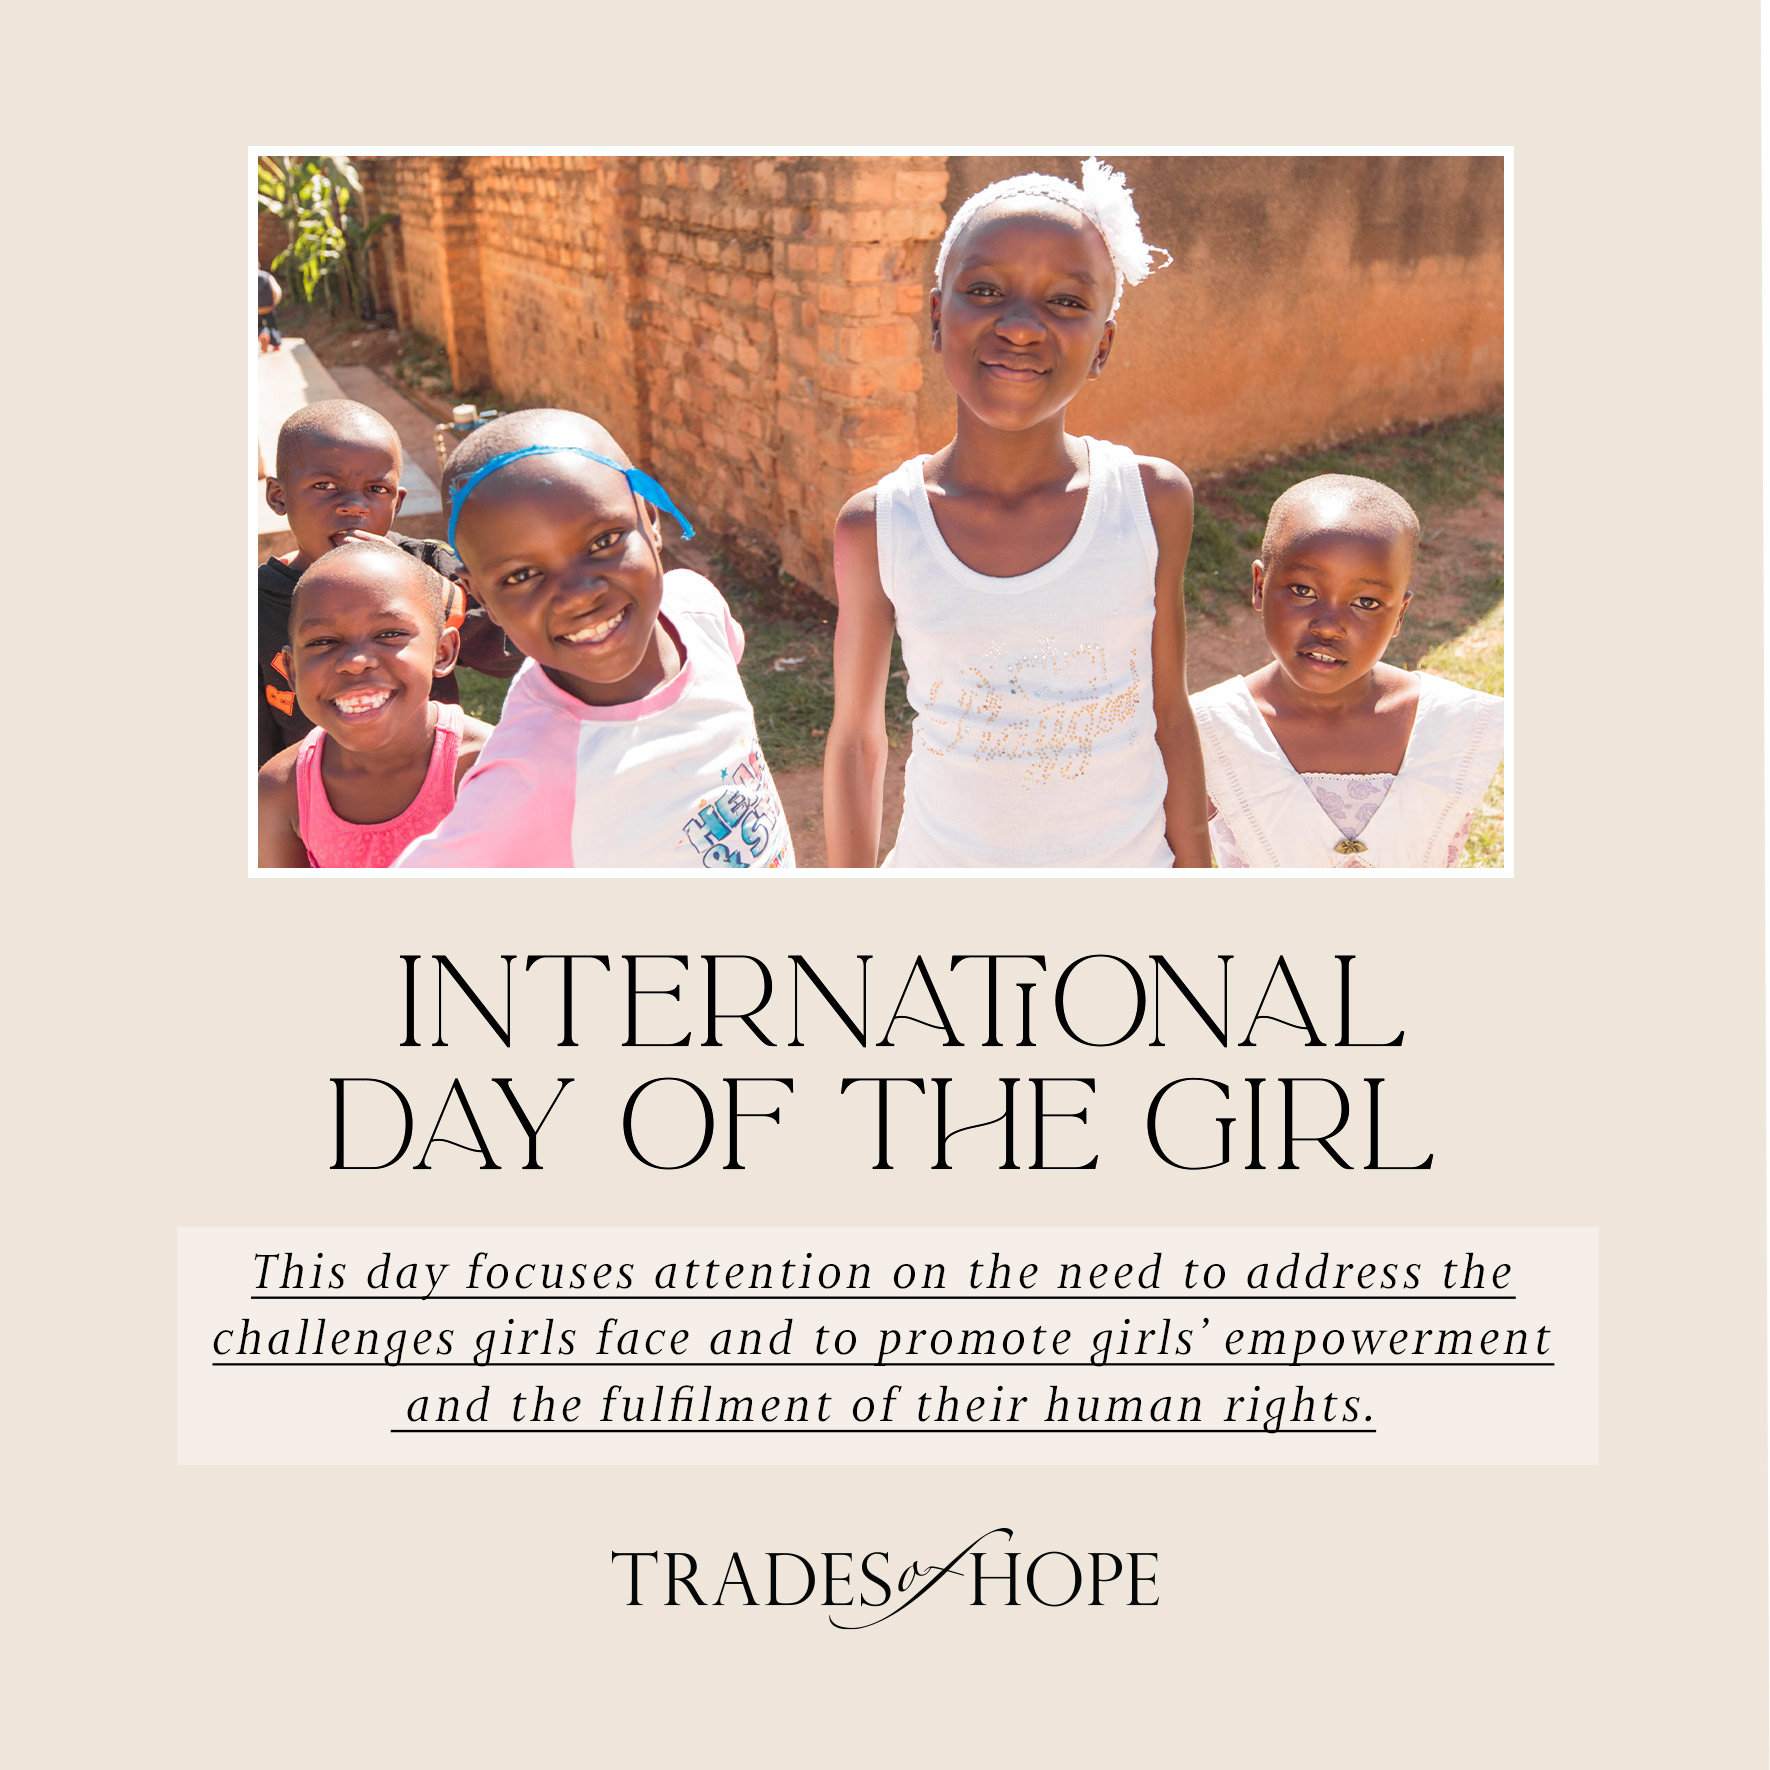 Happy International Day of the Girl!